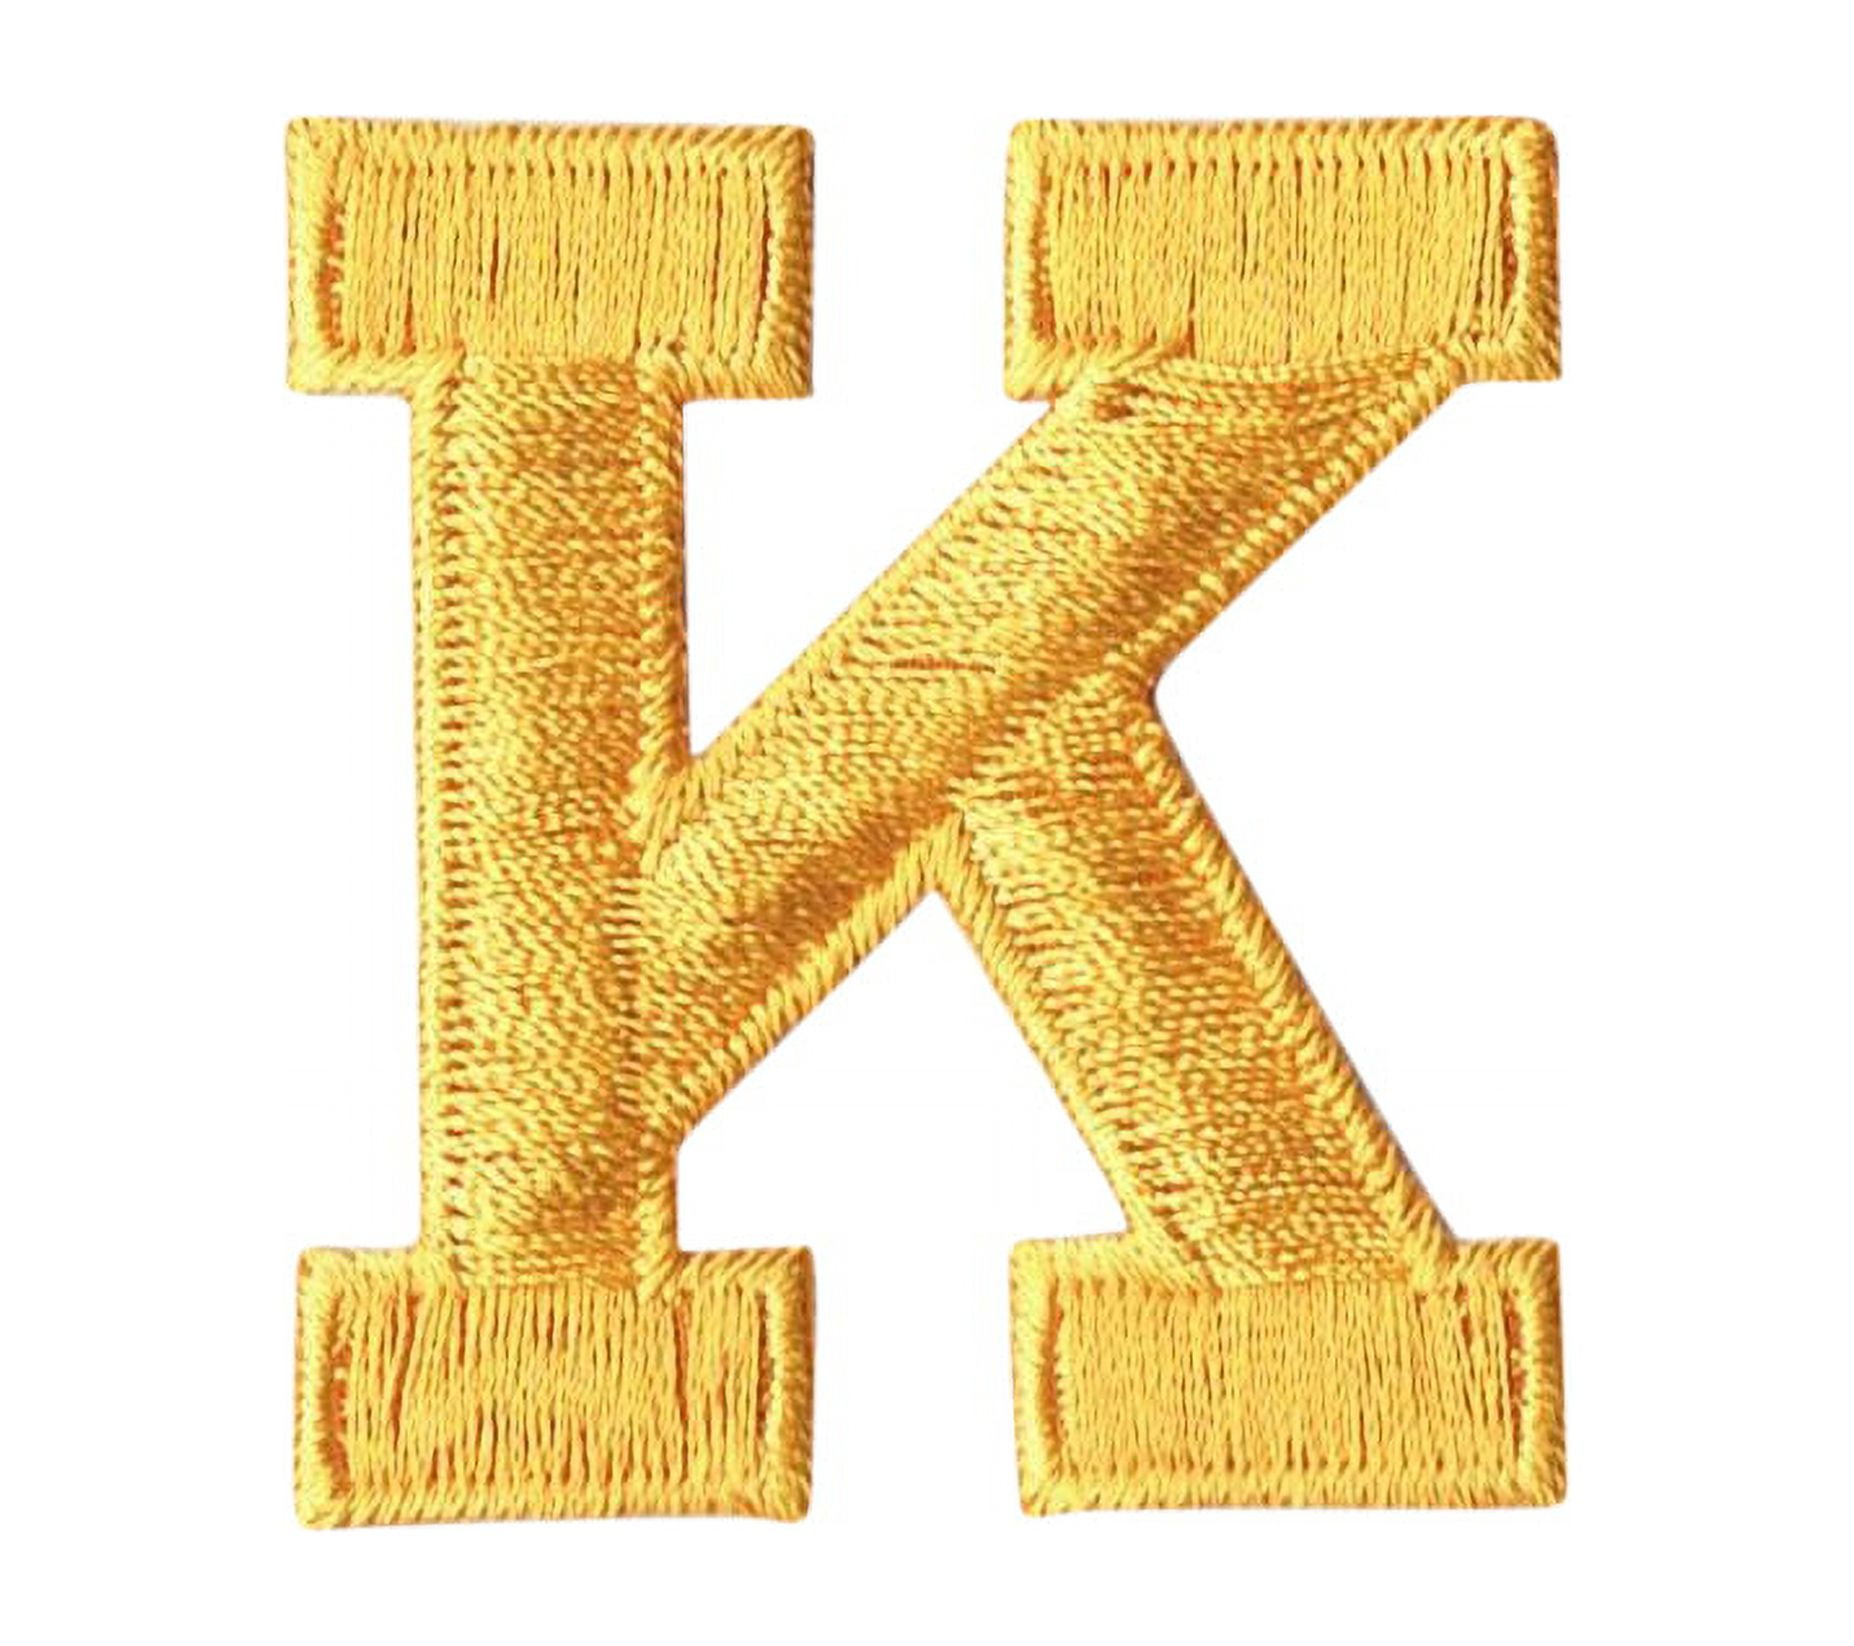 Red Embroidered Letter Iron-On Patch K - 3